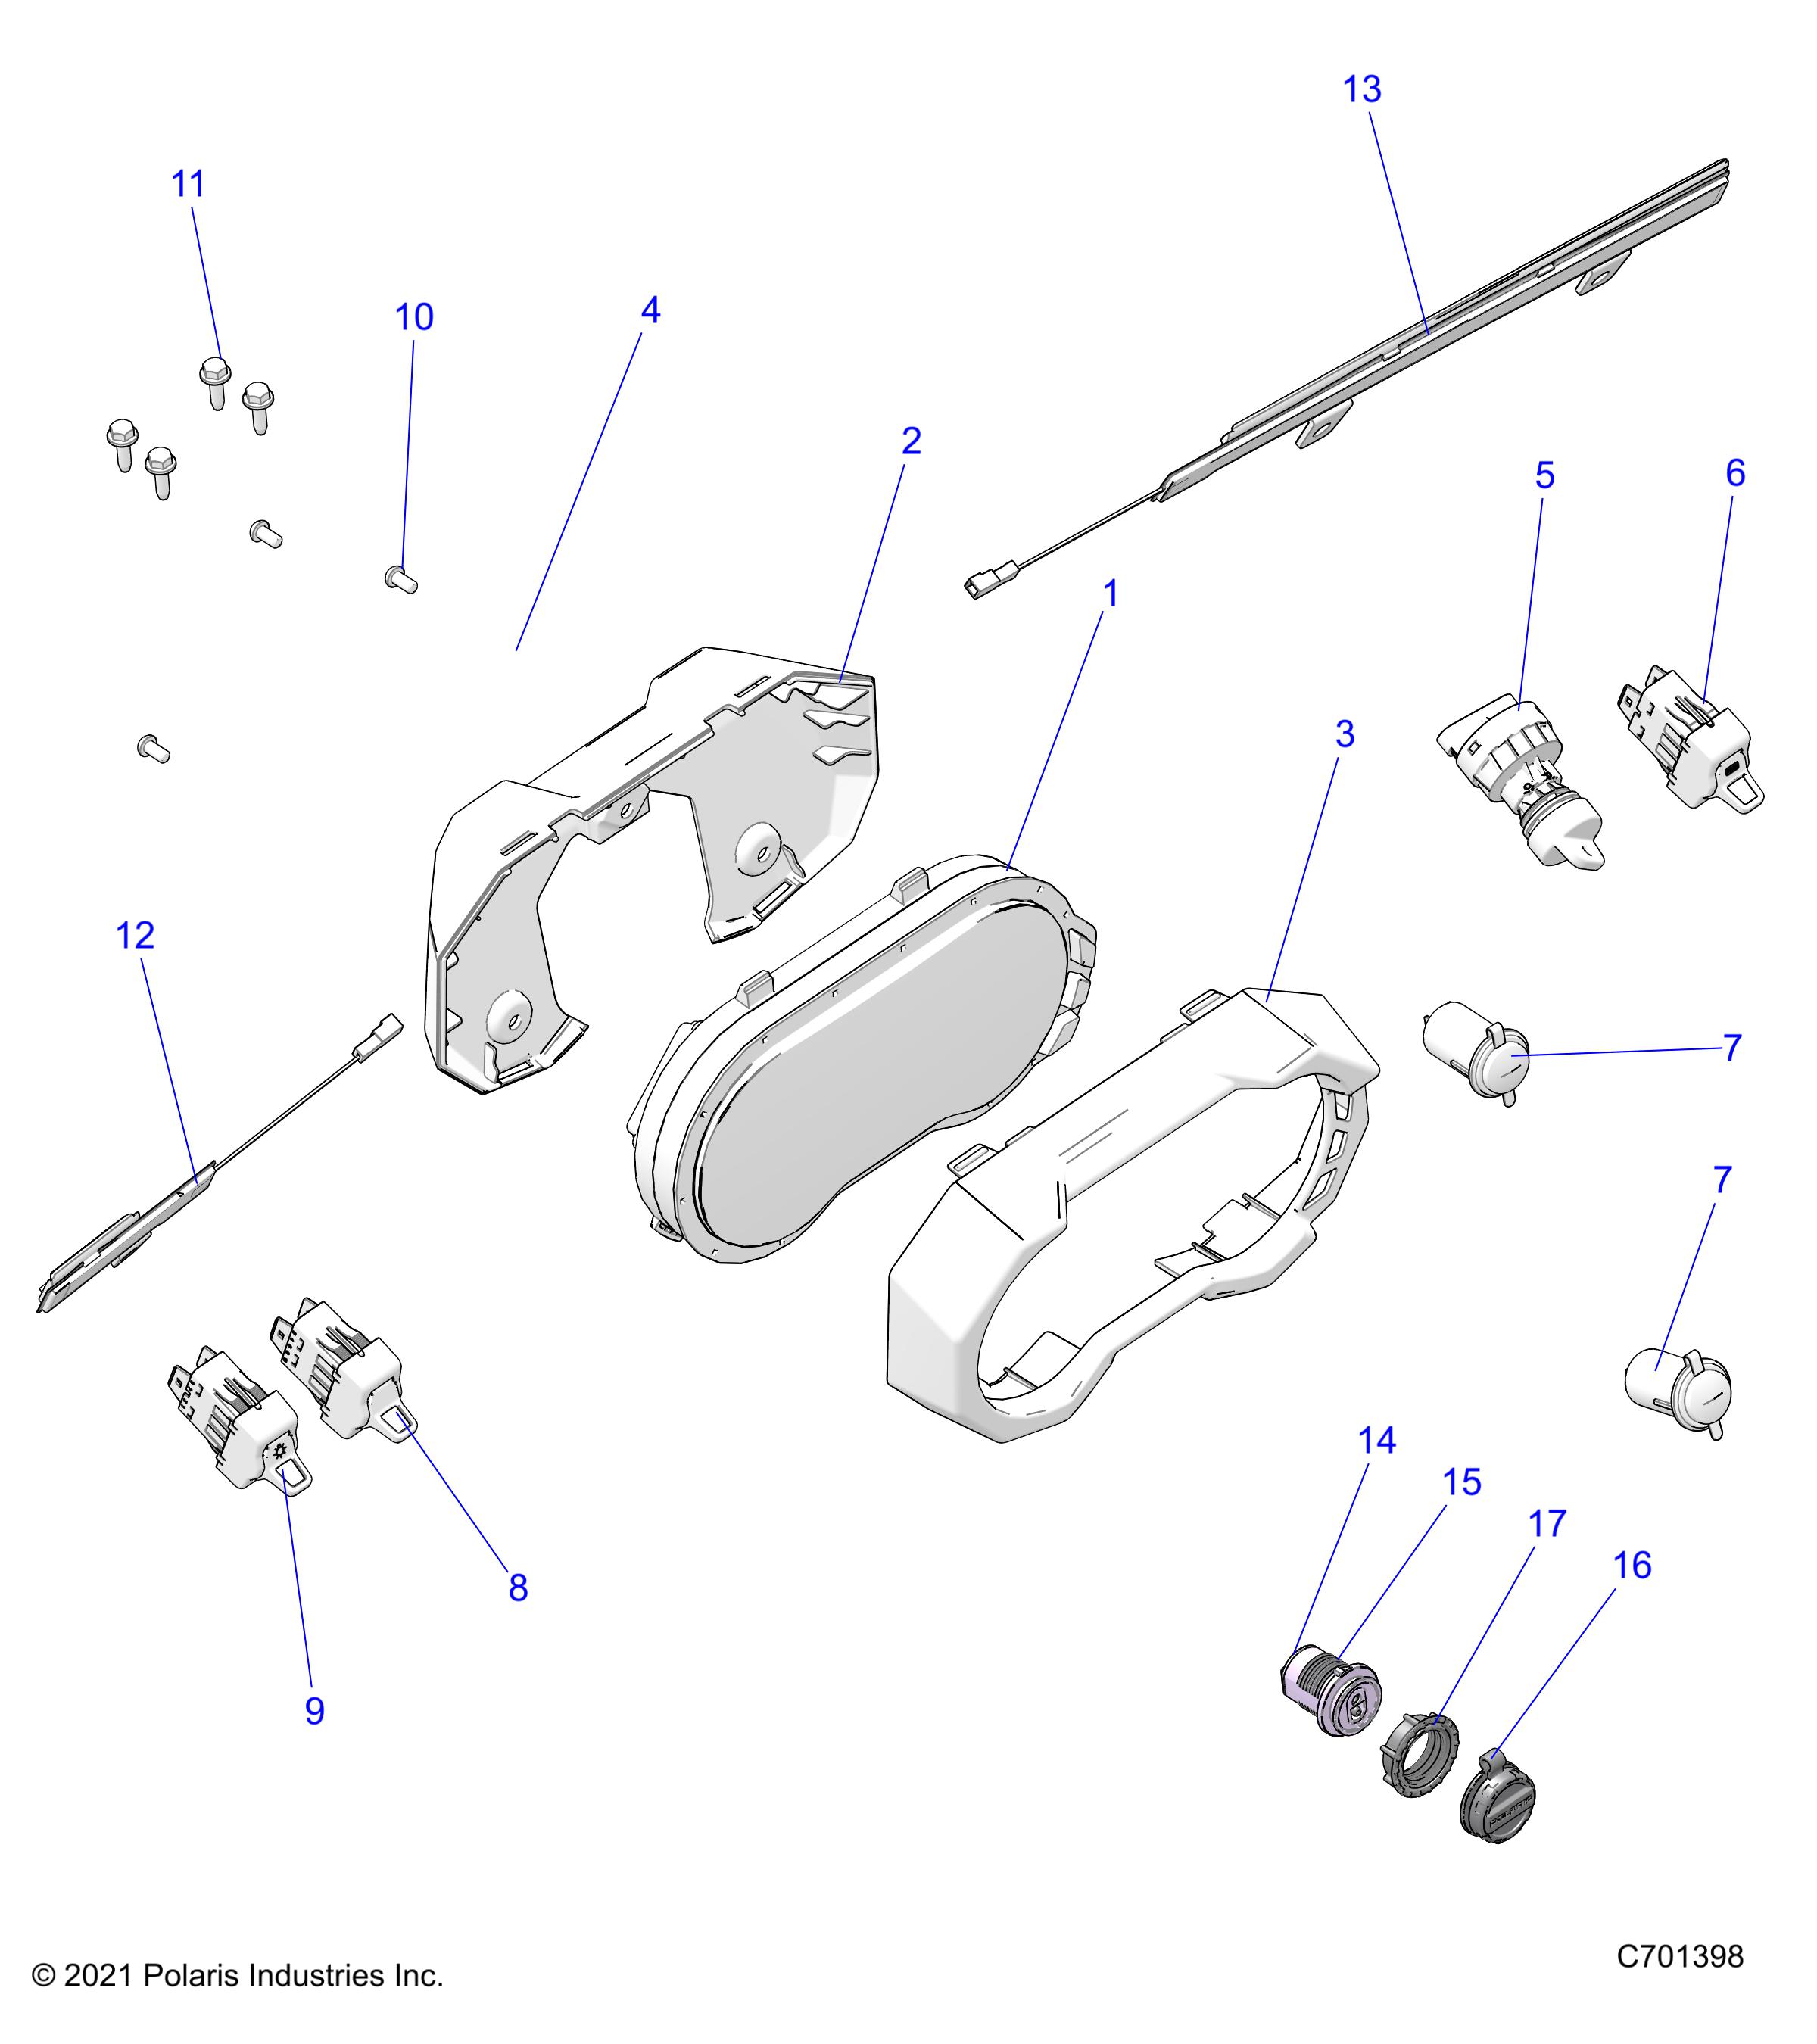 Part Number : 4080751 SWITCH-3 POSITION 4WD